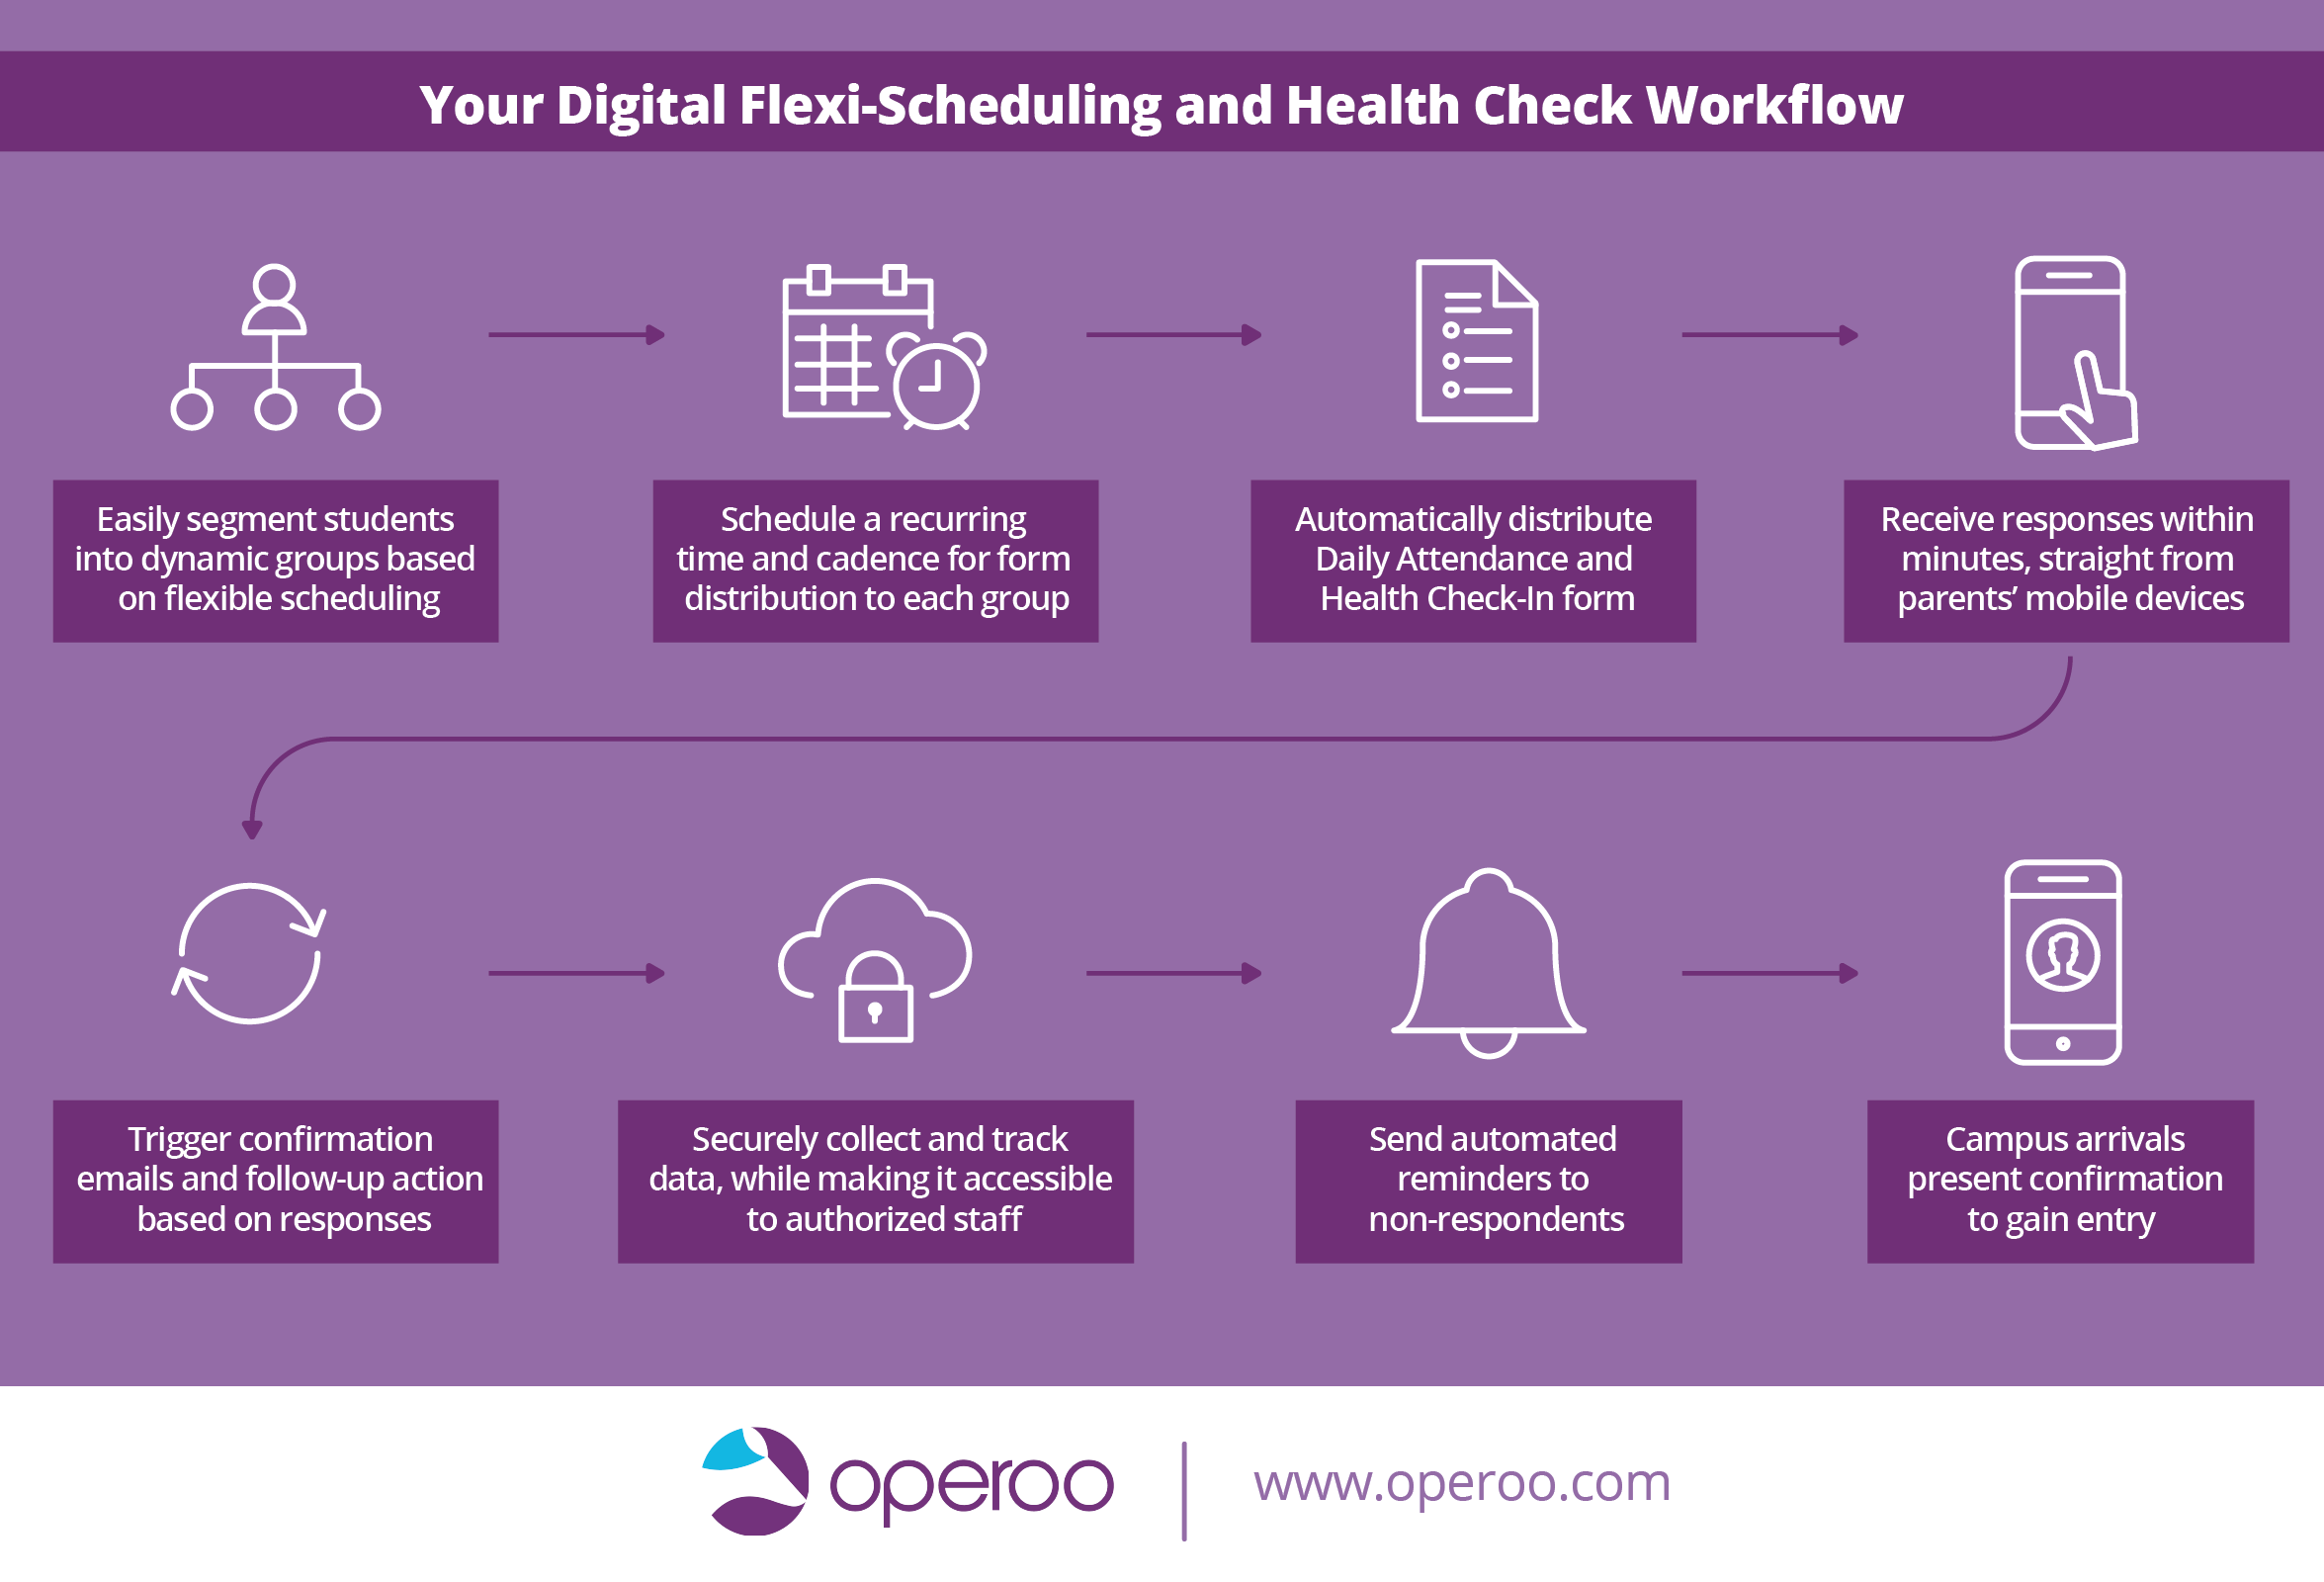 Your Digital Flexi-Scheduling and Health Check Workflow